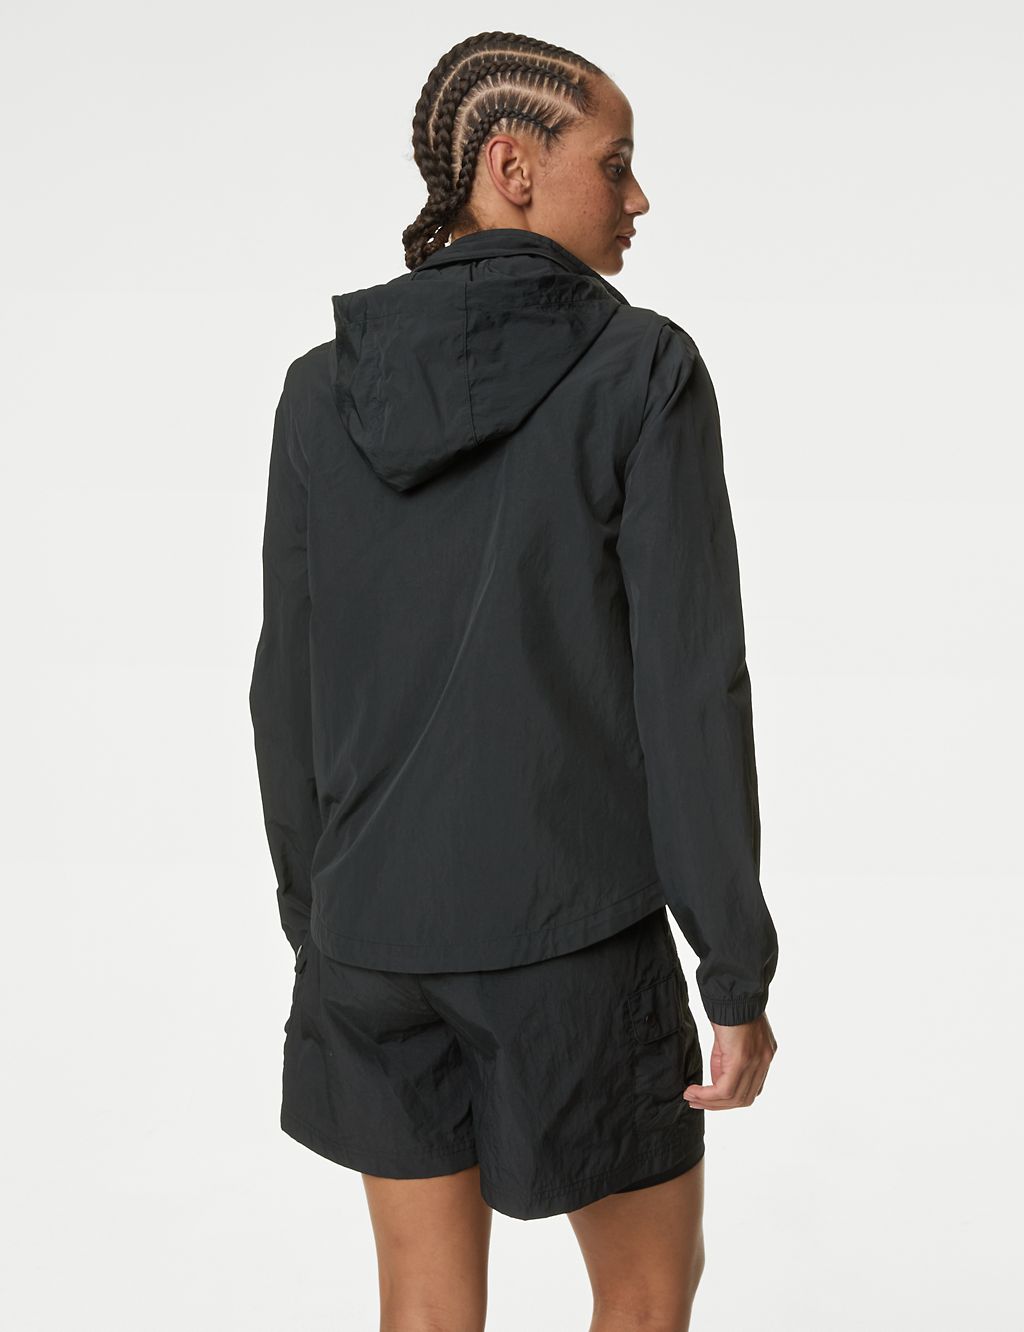 Convertible Sports Jacket with Stormwear™ 8 of 8